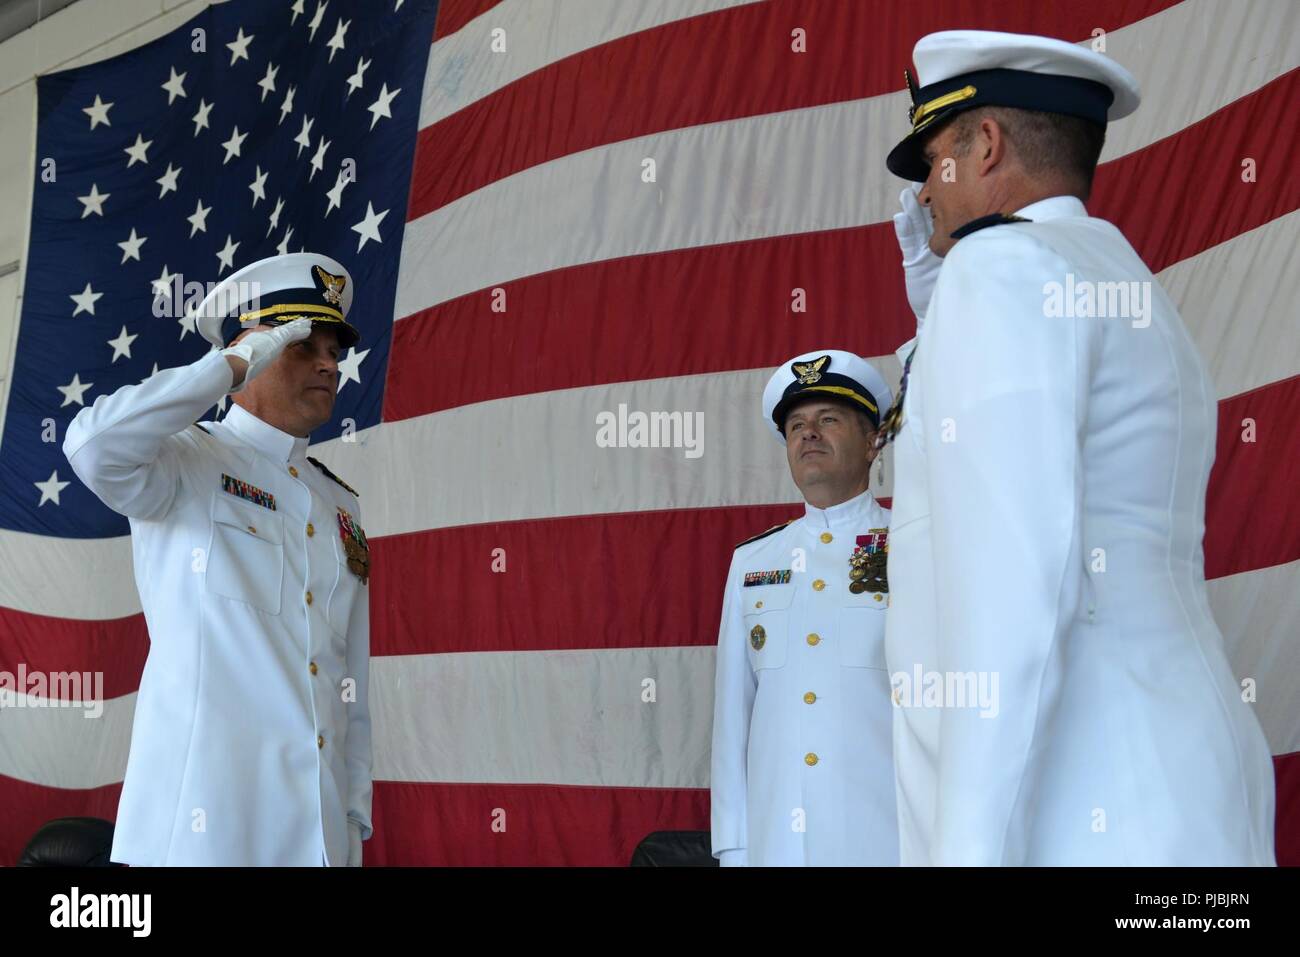 Capt. Andrew W. Ericks (left) relieves Capt. Frederick C. Riedlin (right) as commanding officer of Air Station Barbers Point while Rear Adm. Brian Penoyer (center) observes at a change of command ceremony at Air Station Barbers Point, July 6, 2018. Riedlin is transferring to become the Chief of the Office of Aviation Forces (CG-711). Stock Photo